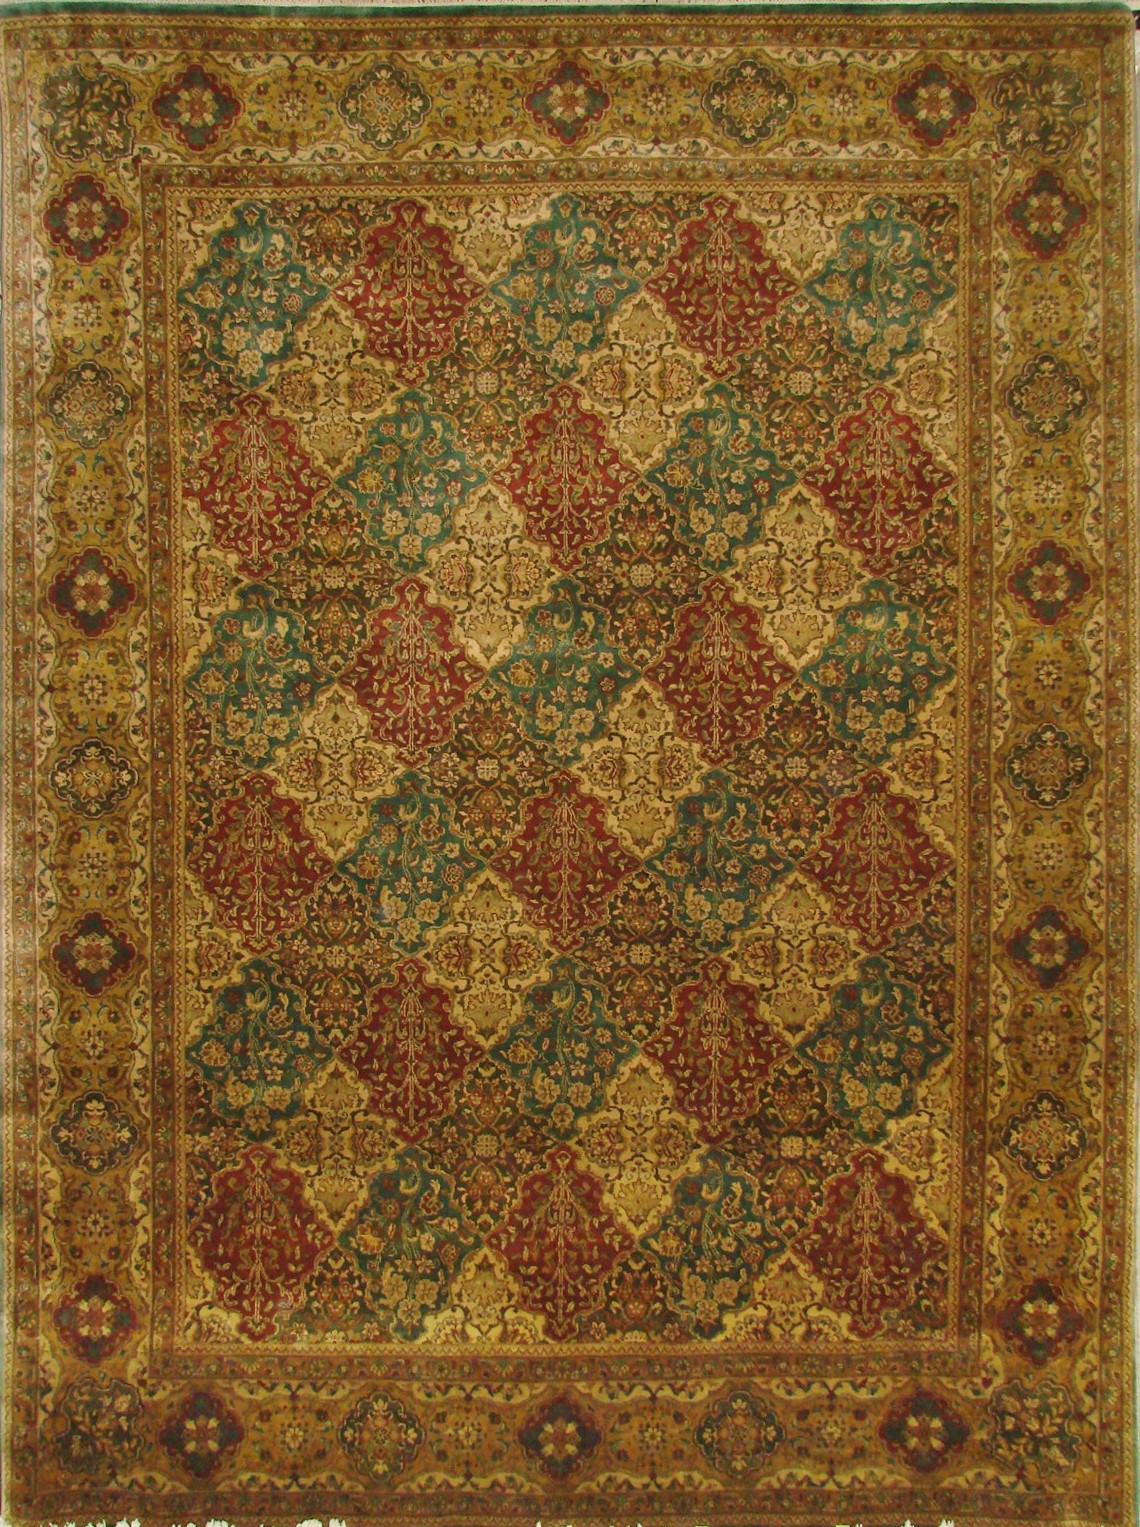 Clearance & Discount Rugs NK-01 0453 Ivory - Beige & Multi Hand Knotted Rug